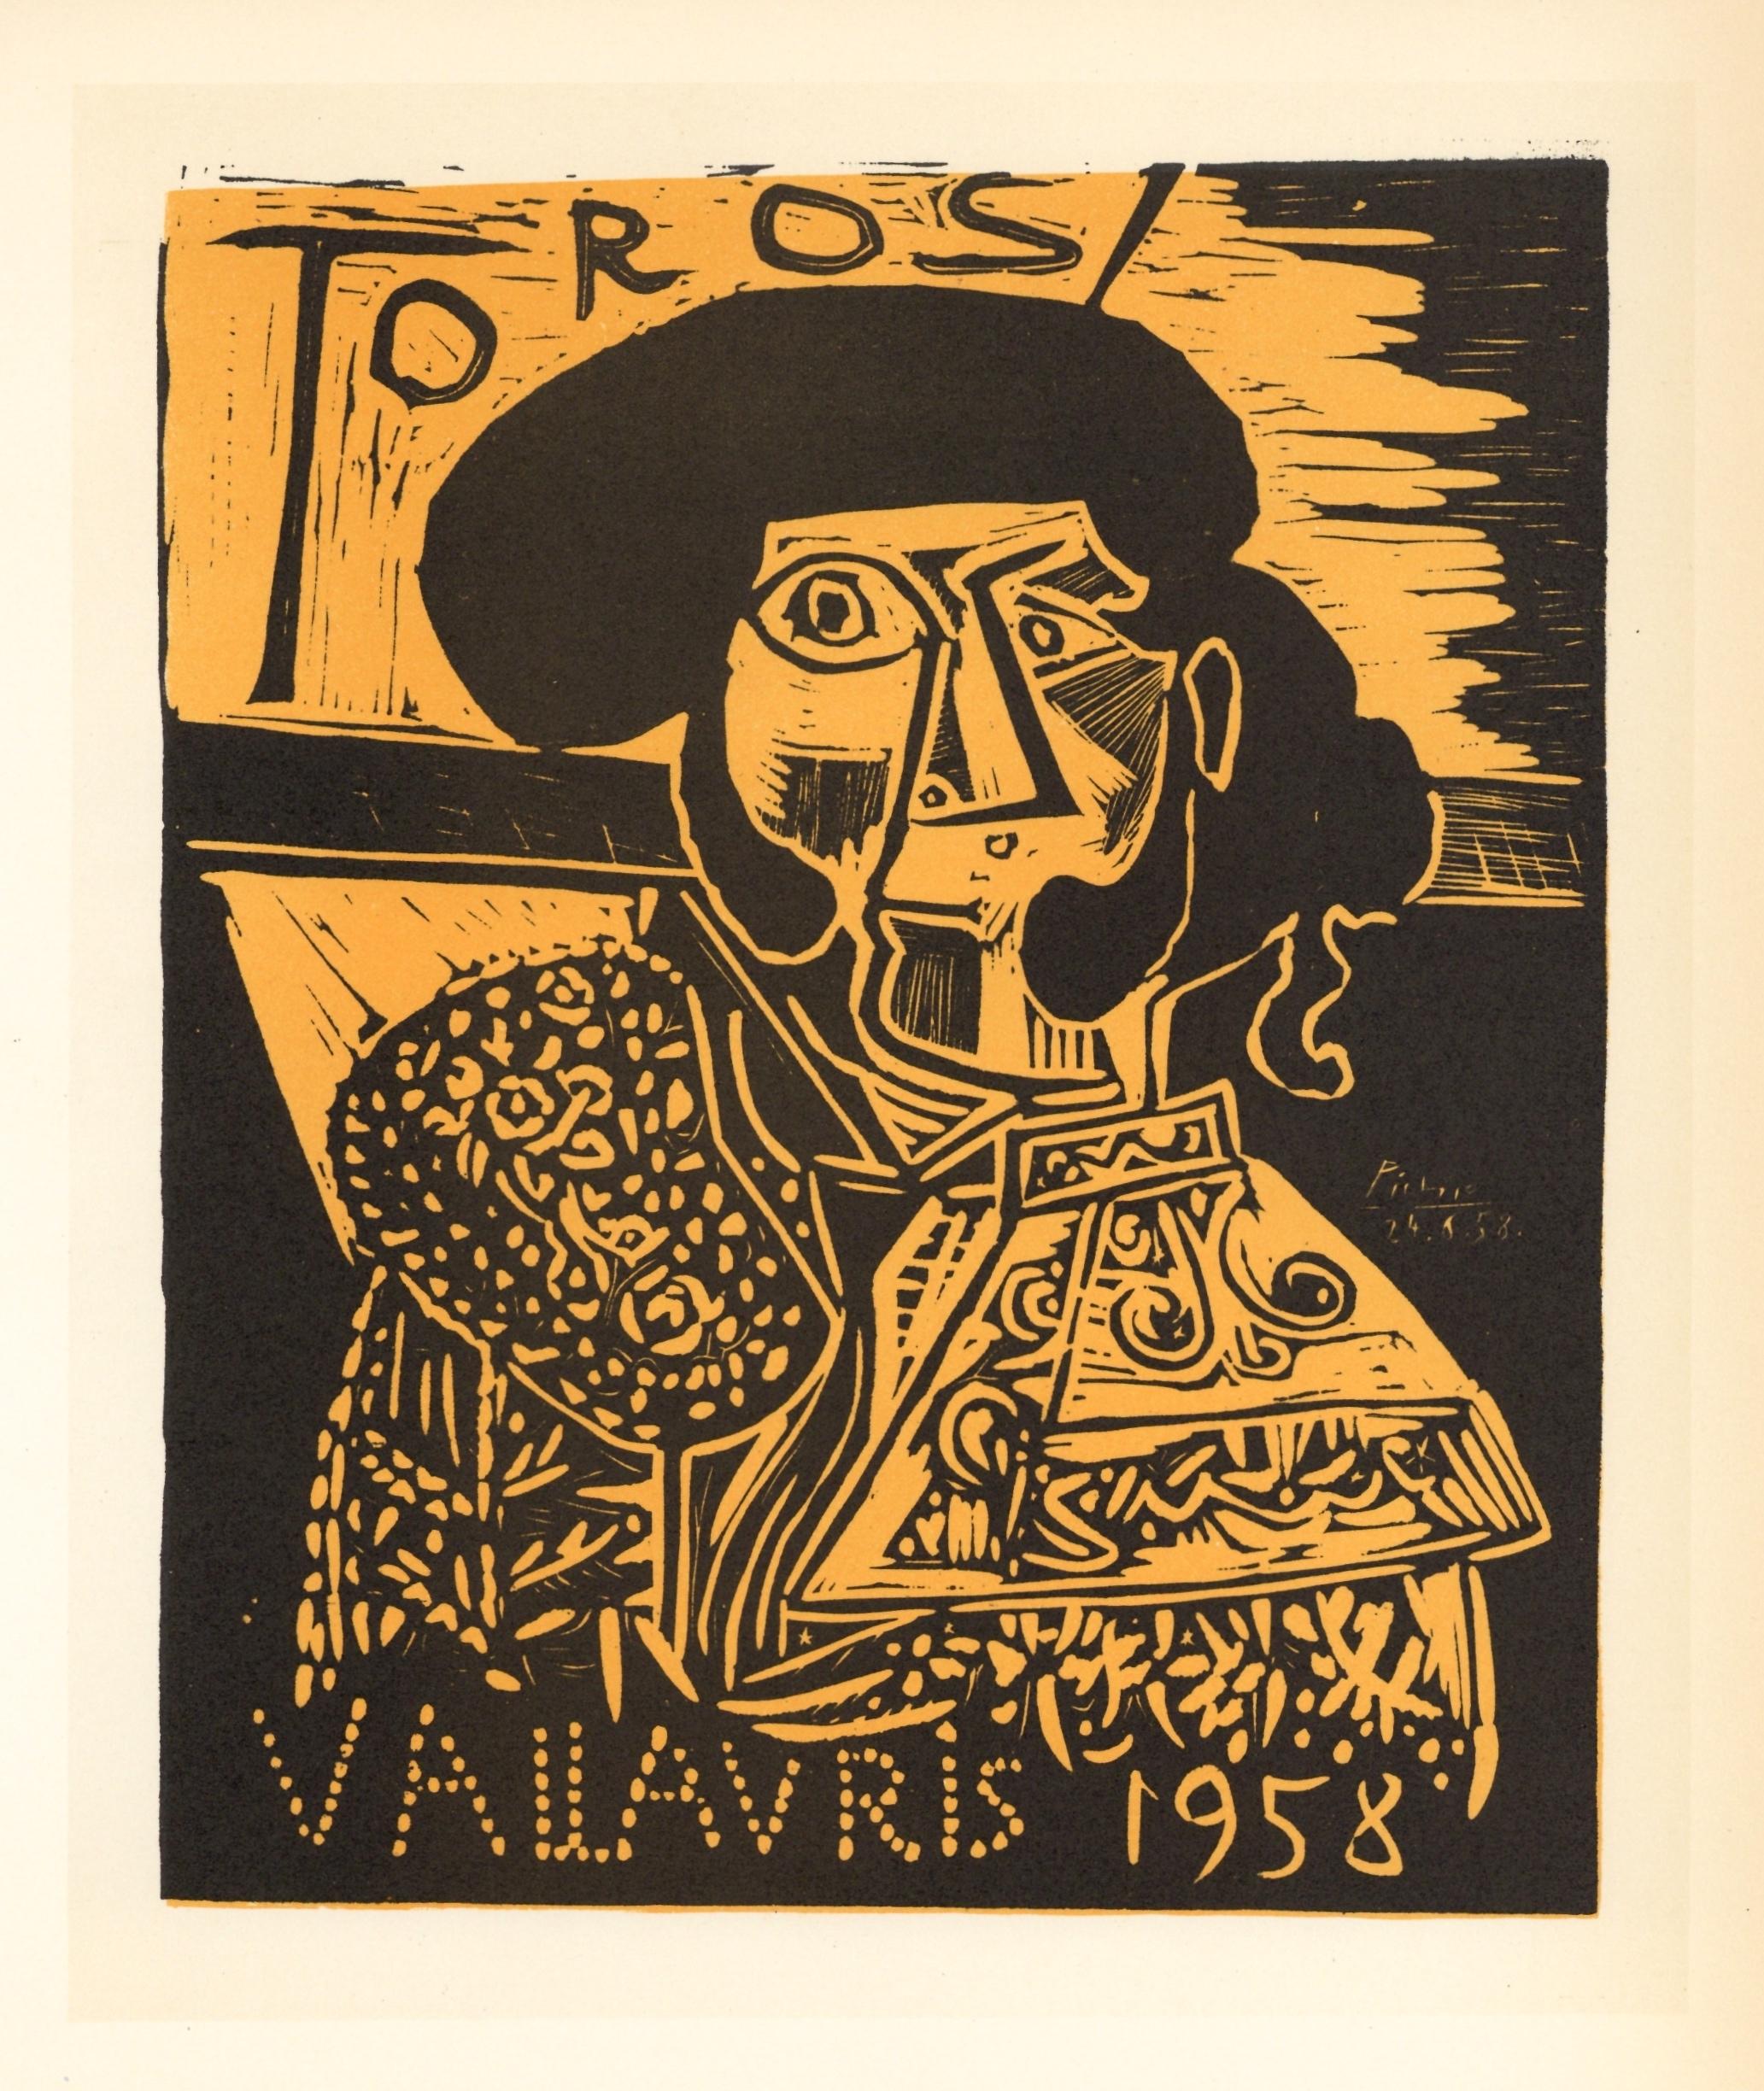 "Toros Vallauris" lithograph poster - Print by (after) Pablo Picasso